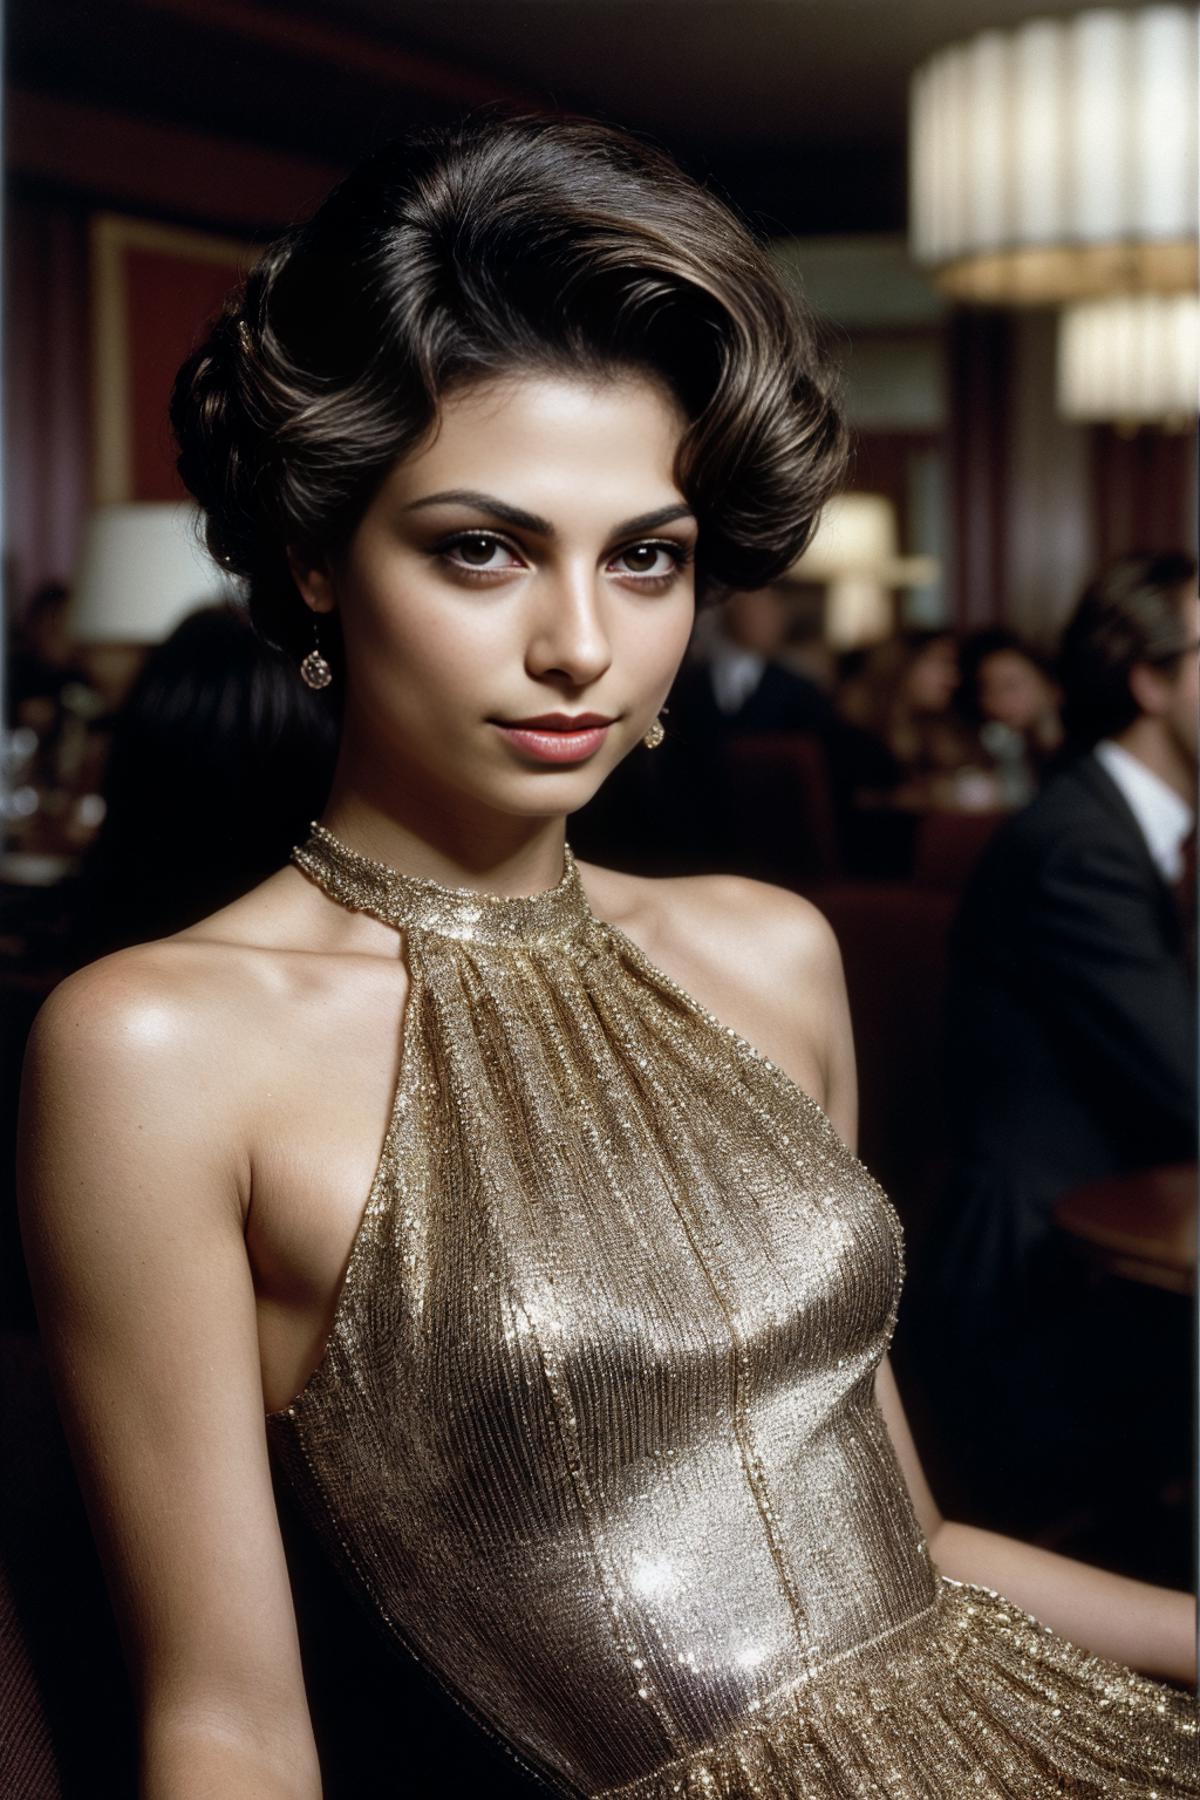 Morena Baccarin image by AIArtjak